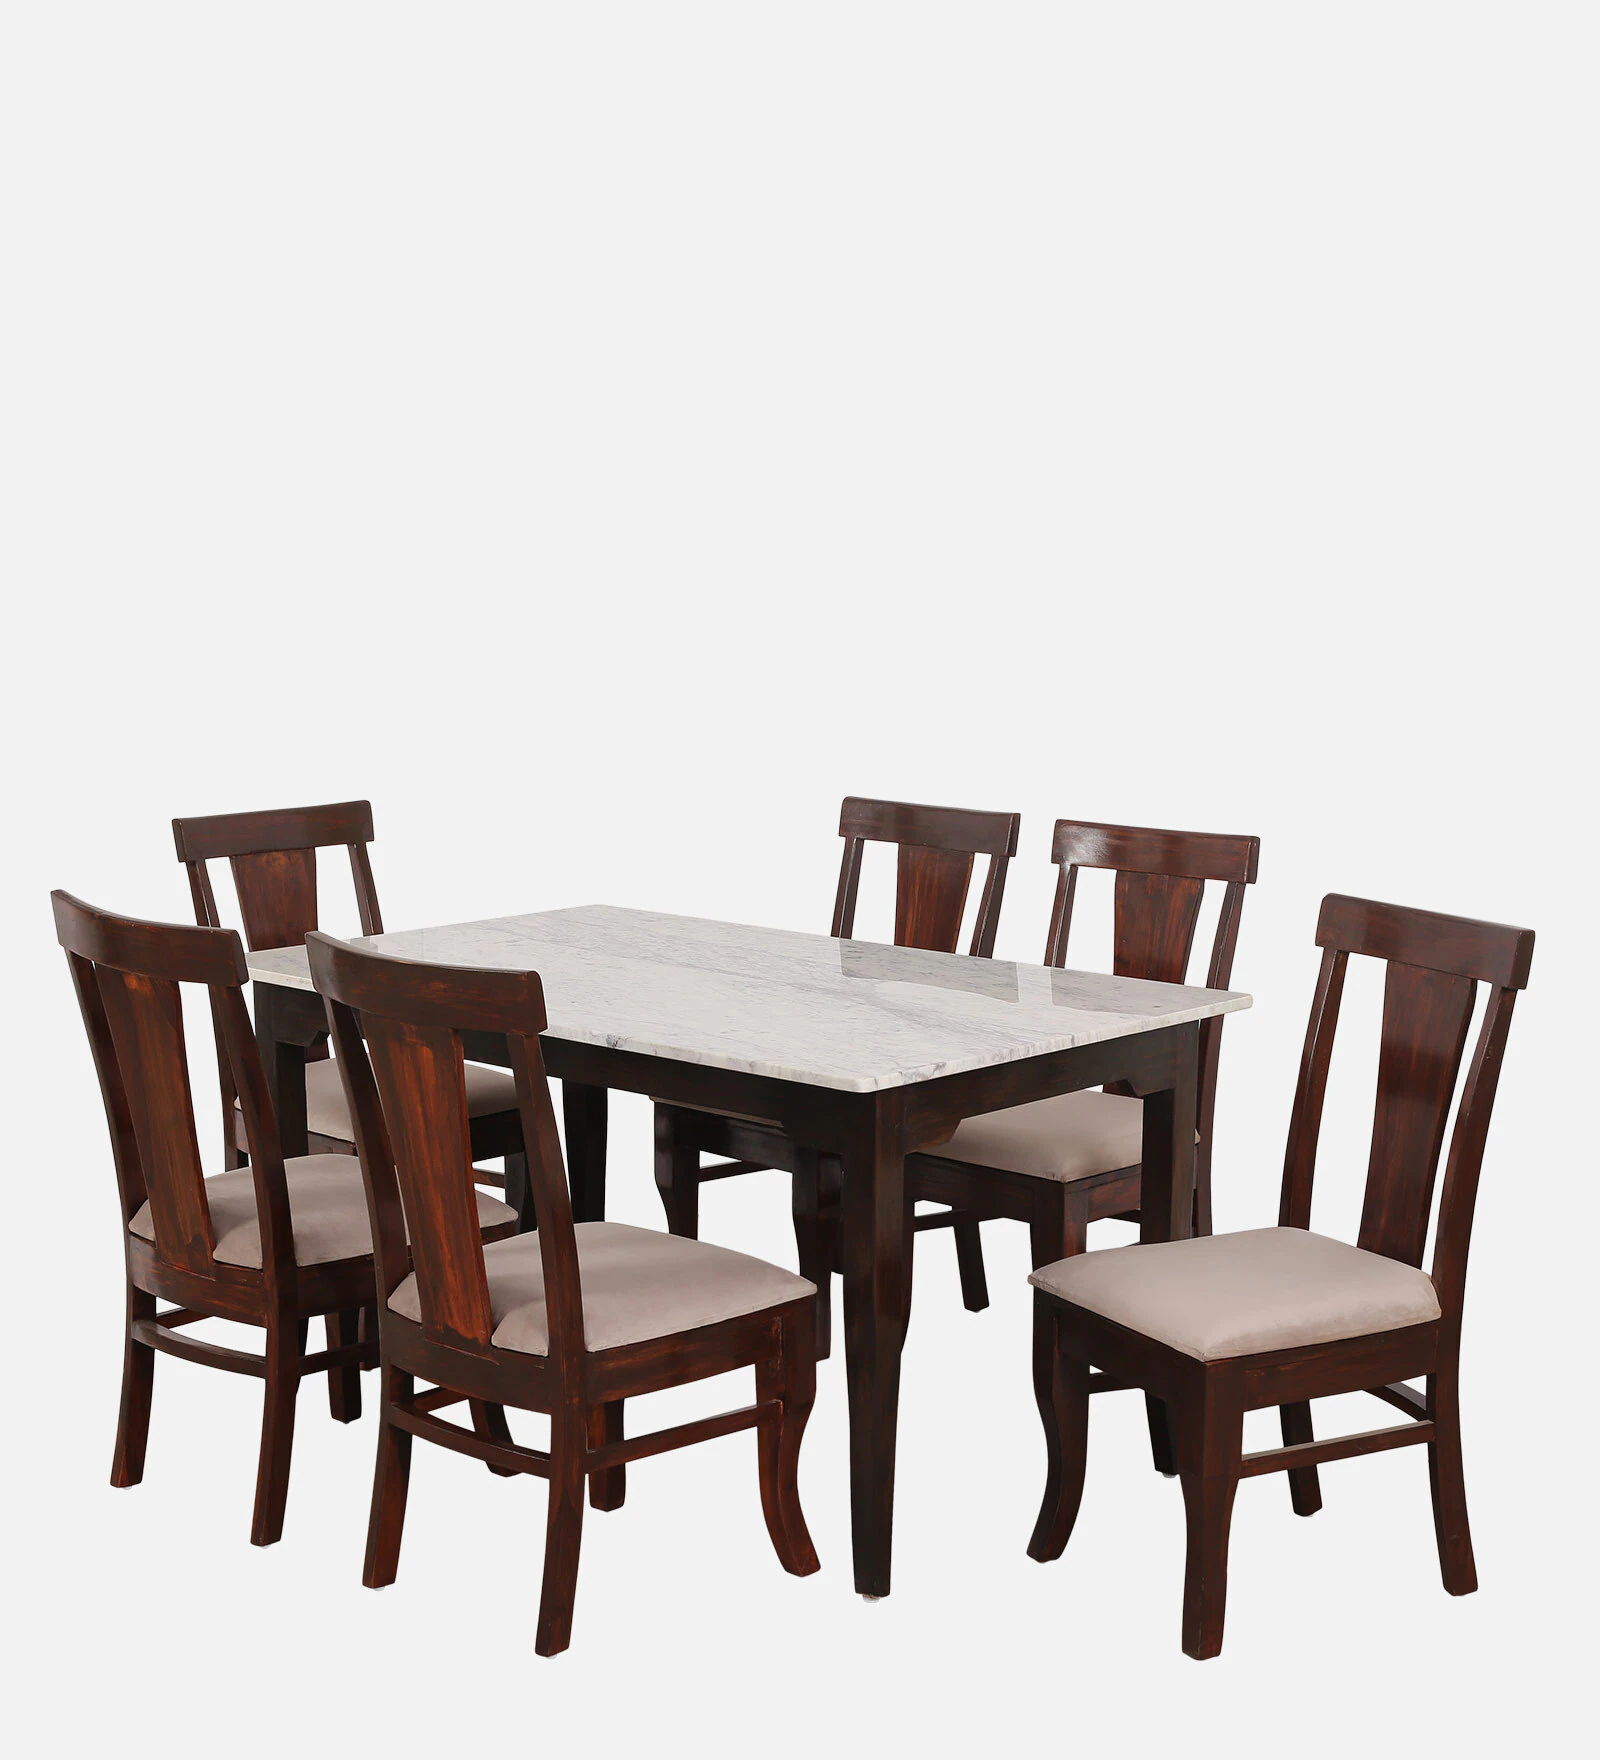 Crafted Marbles Plinto Marble Top 6 Seater Dining Set in Teak Wood Finish